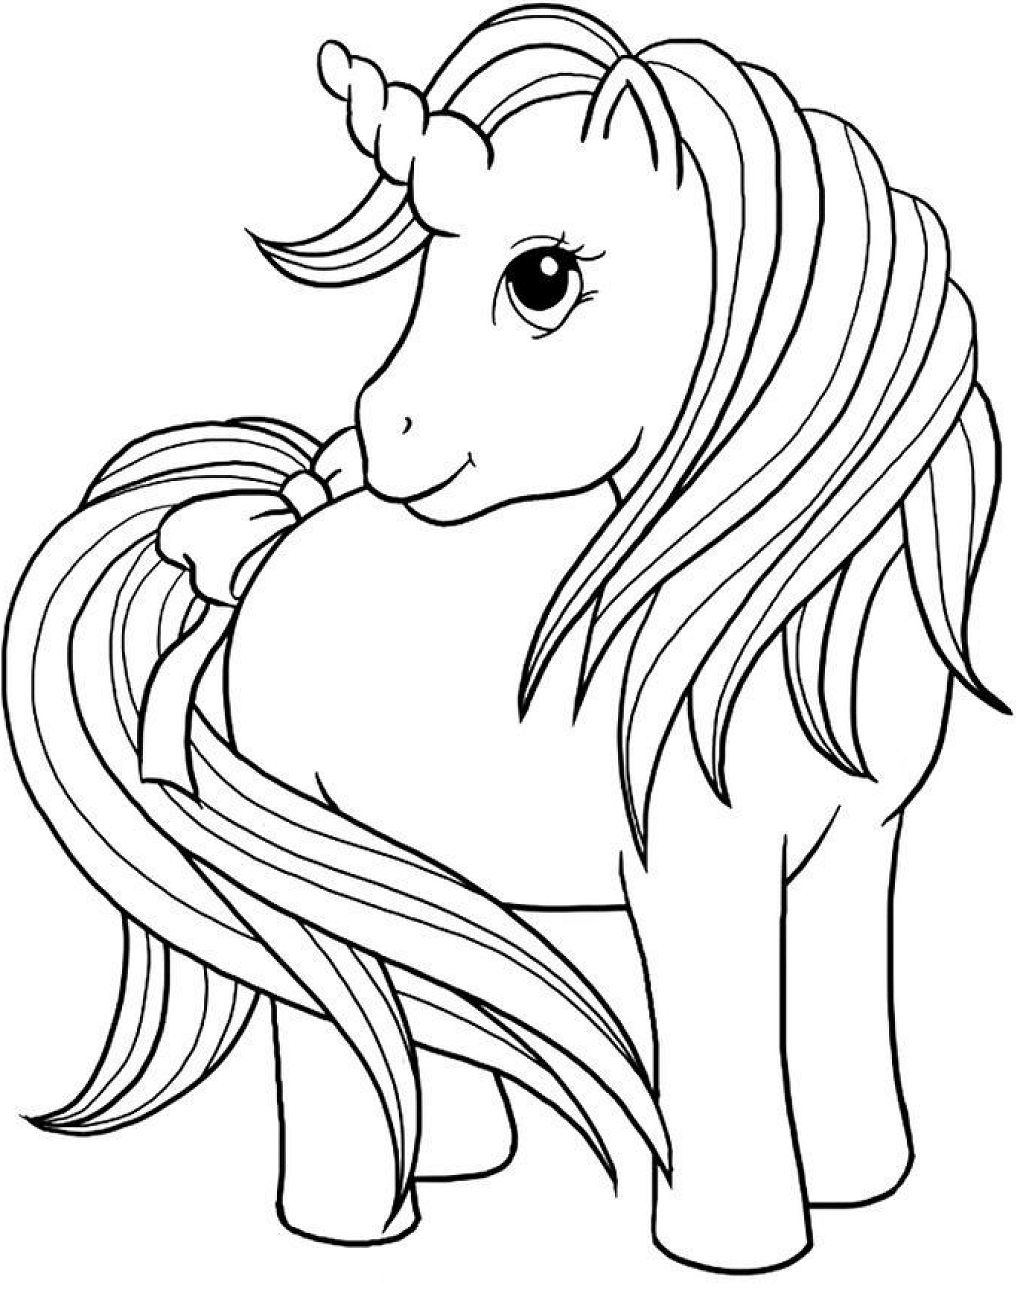 Download Unicorn With Bow At Tail Coloring Page - Free Printable ...